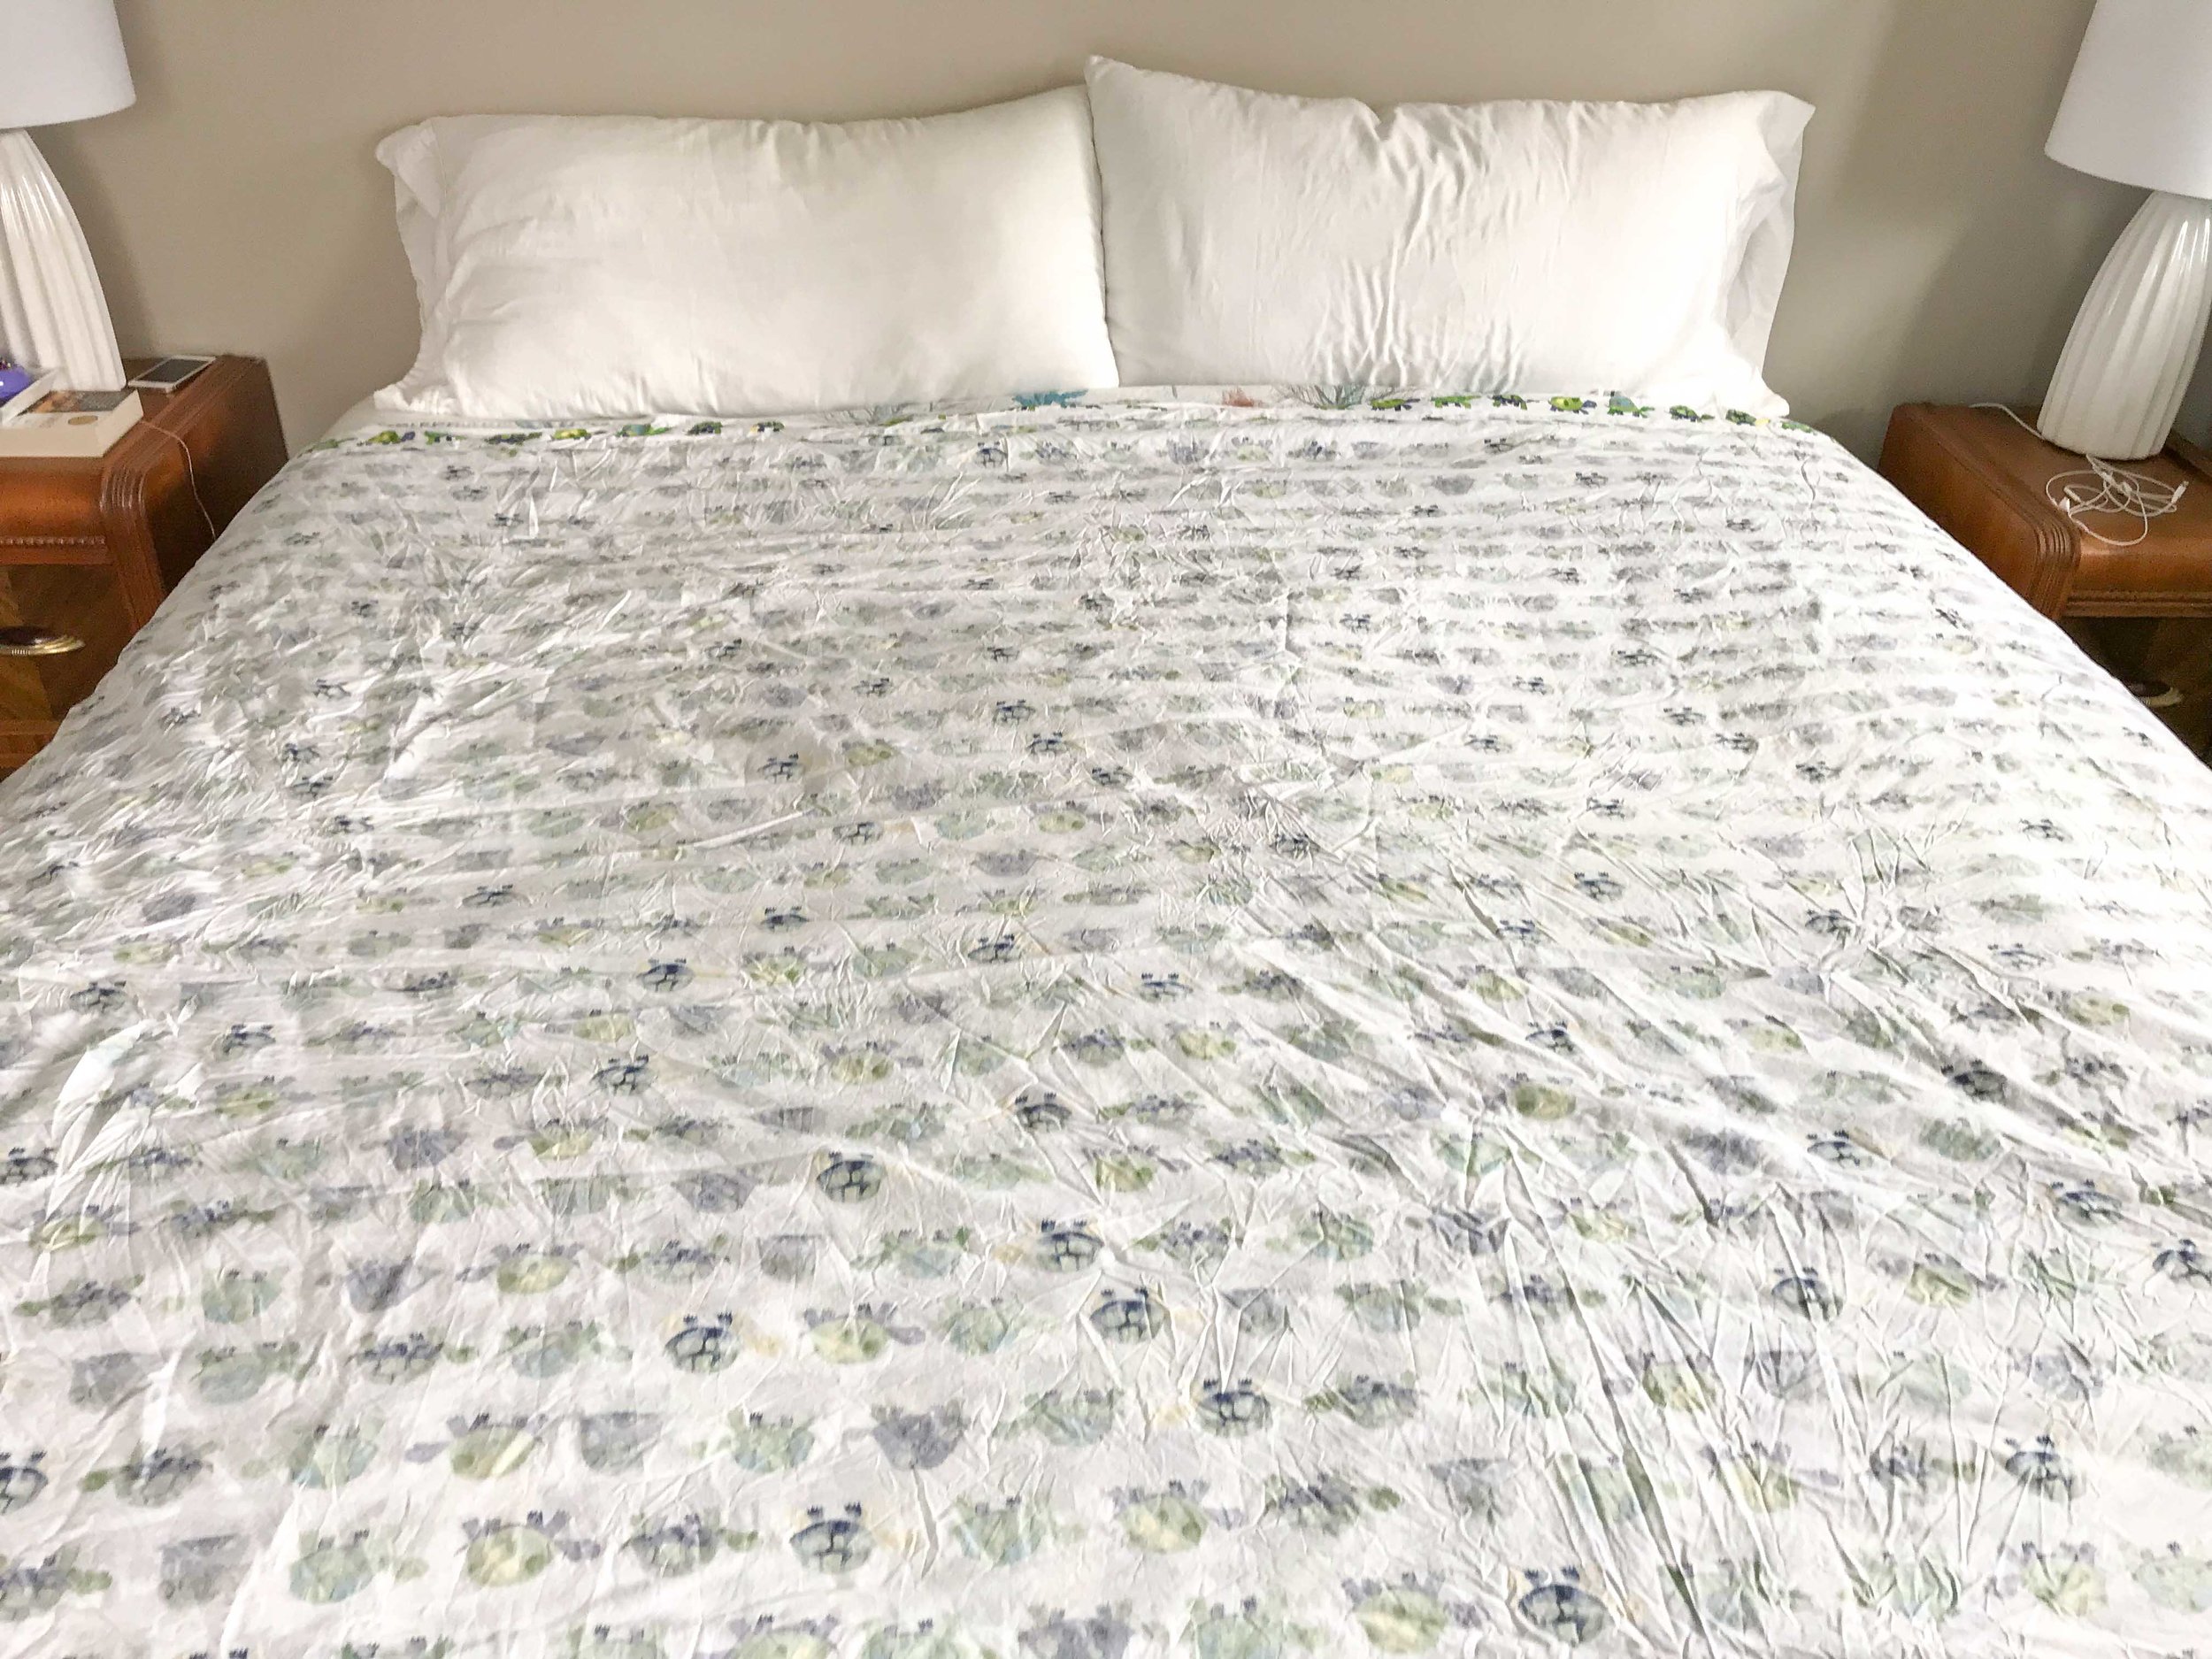 Make A Duvet Cover From Sheets Mid, How To Make A Twin Duvet Cover From Sheets